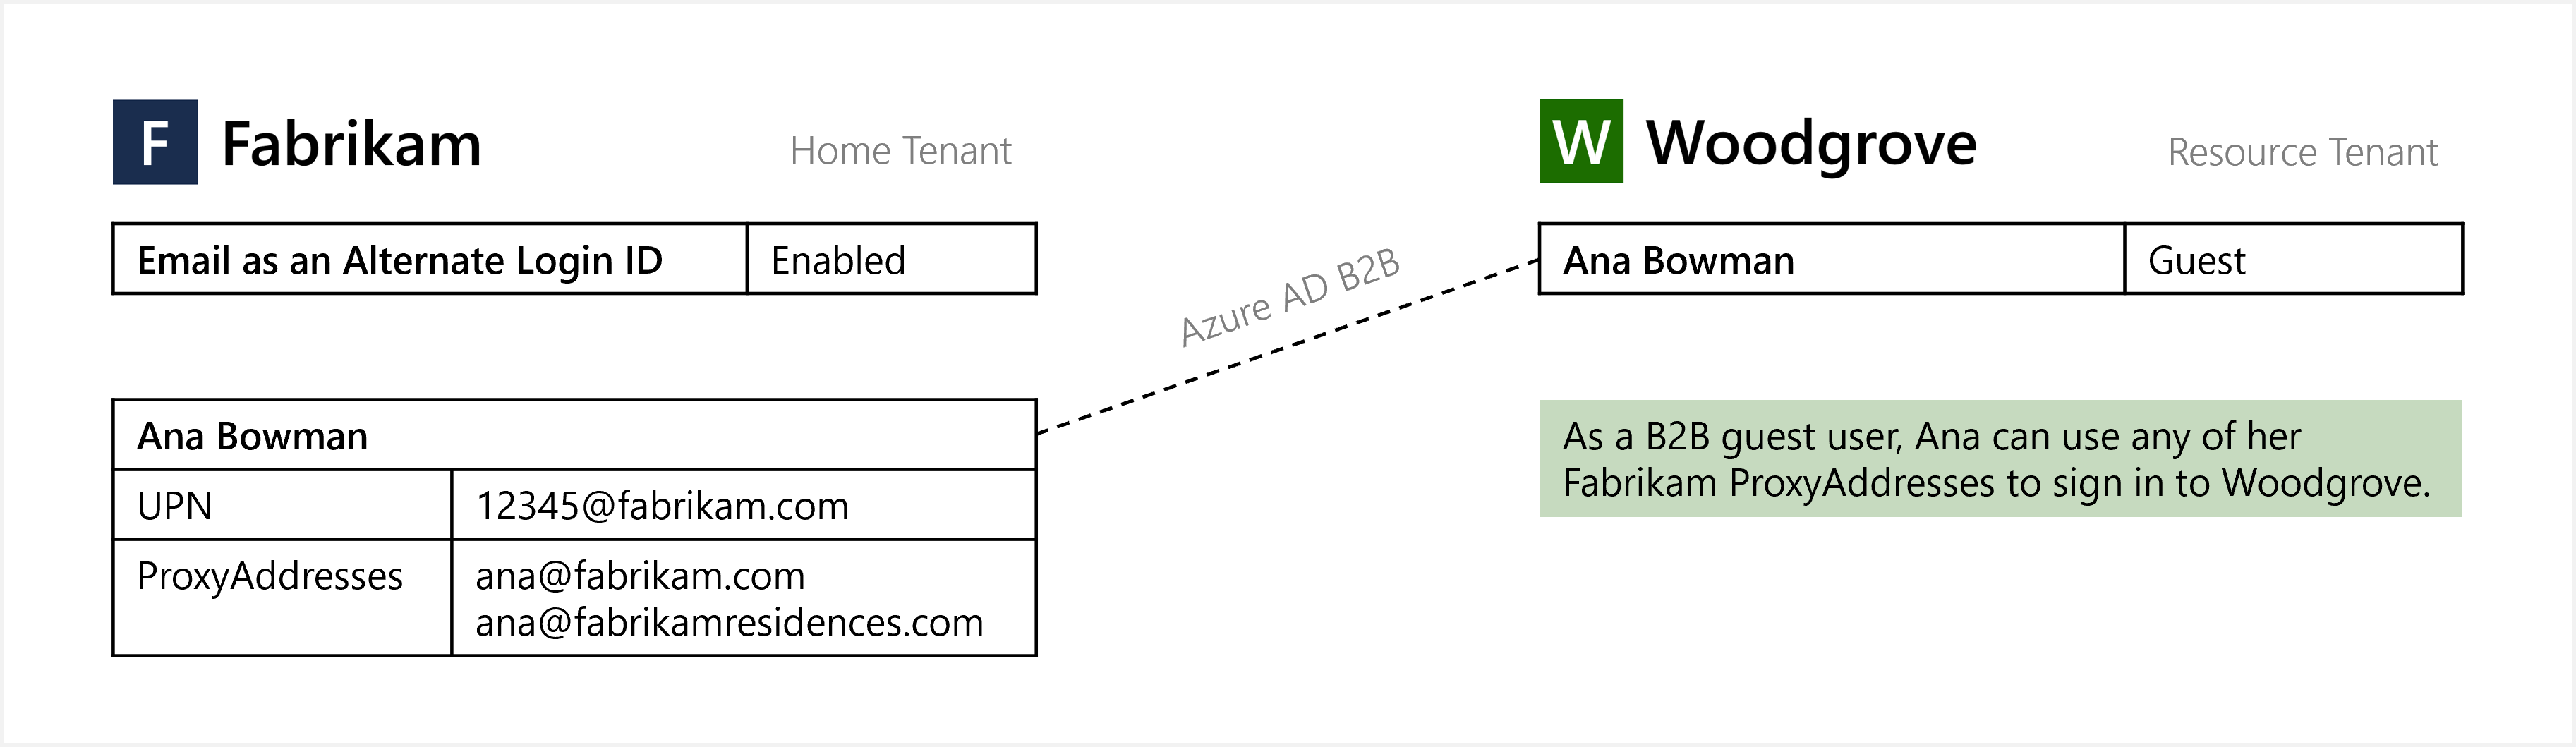 Diagram of email as an alternate login I D for B 2 B guest user sign-in.